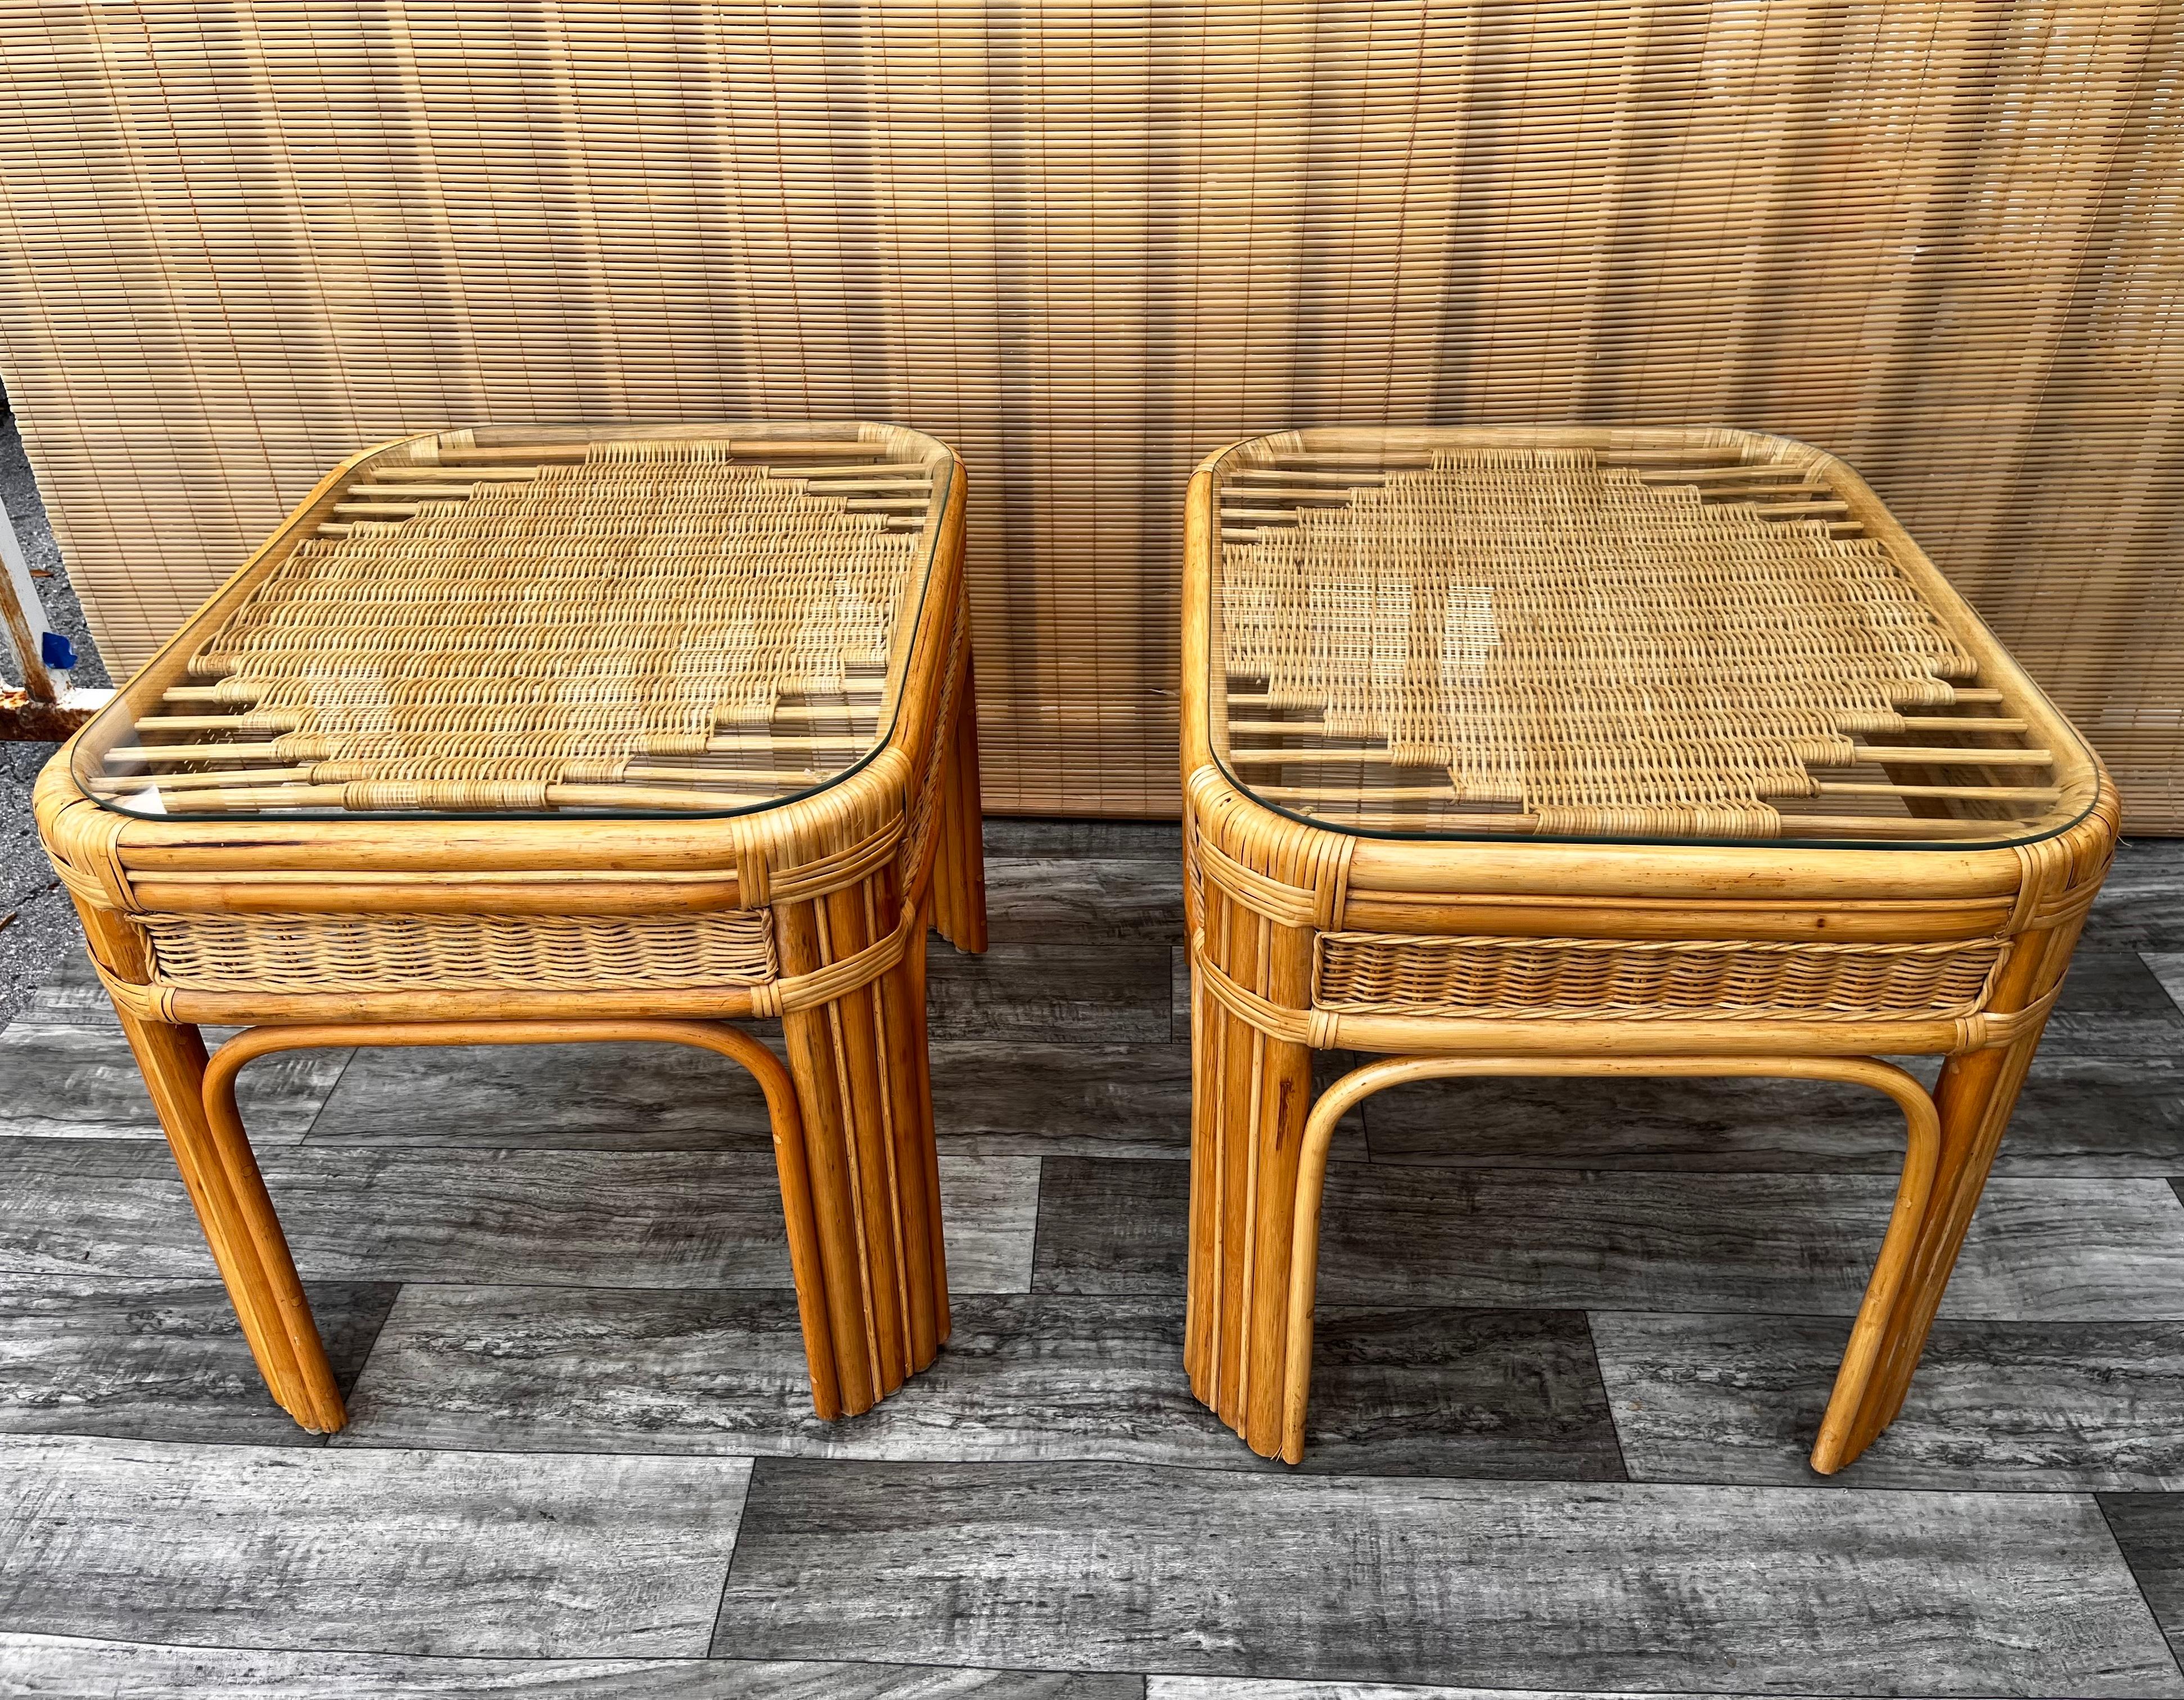 A pair of large late 20th century coastal style weaved rattan side tables. circa late 1980s
Features a beautiful hand woven top detail, rounded corners, finished in a natural rattan color, and a removable glass top.
In excellent original condition